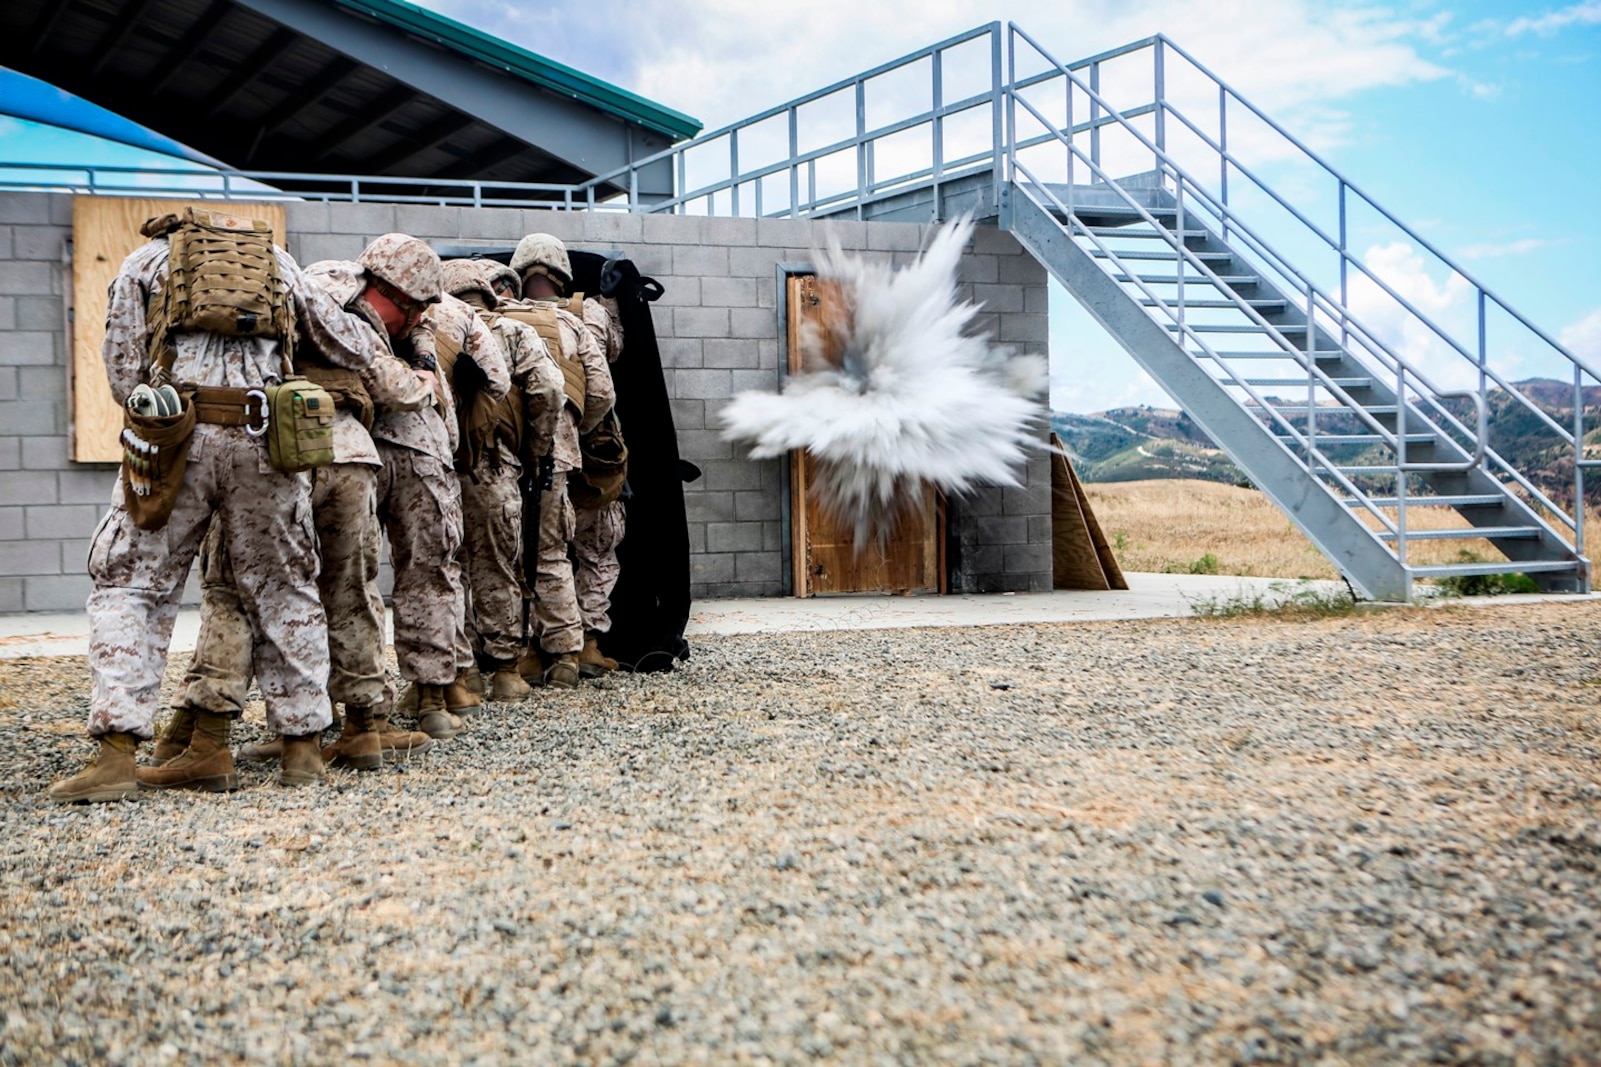 U.S. Marines with the 7th Engineer Support Battalion, 1st Marine Logistics Group, go through mock breaching’s as part of group training. The training includes working with simulated explosives as well as breaching doors and windows on range 211A, Camp Pendleton, Calif., May 25, 2016. (U.S. Marine Corps photo by LCpl. Salmineo Sherman Jr. Combat Camera/released)